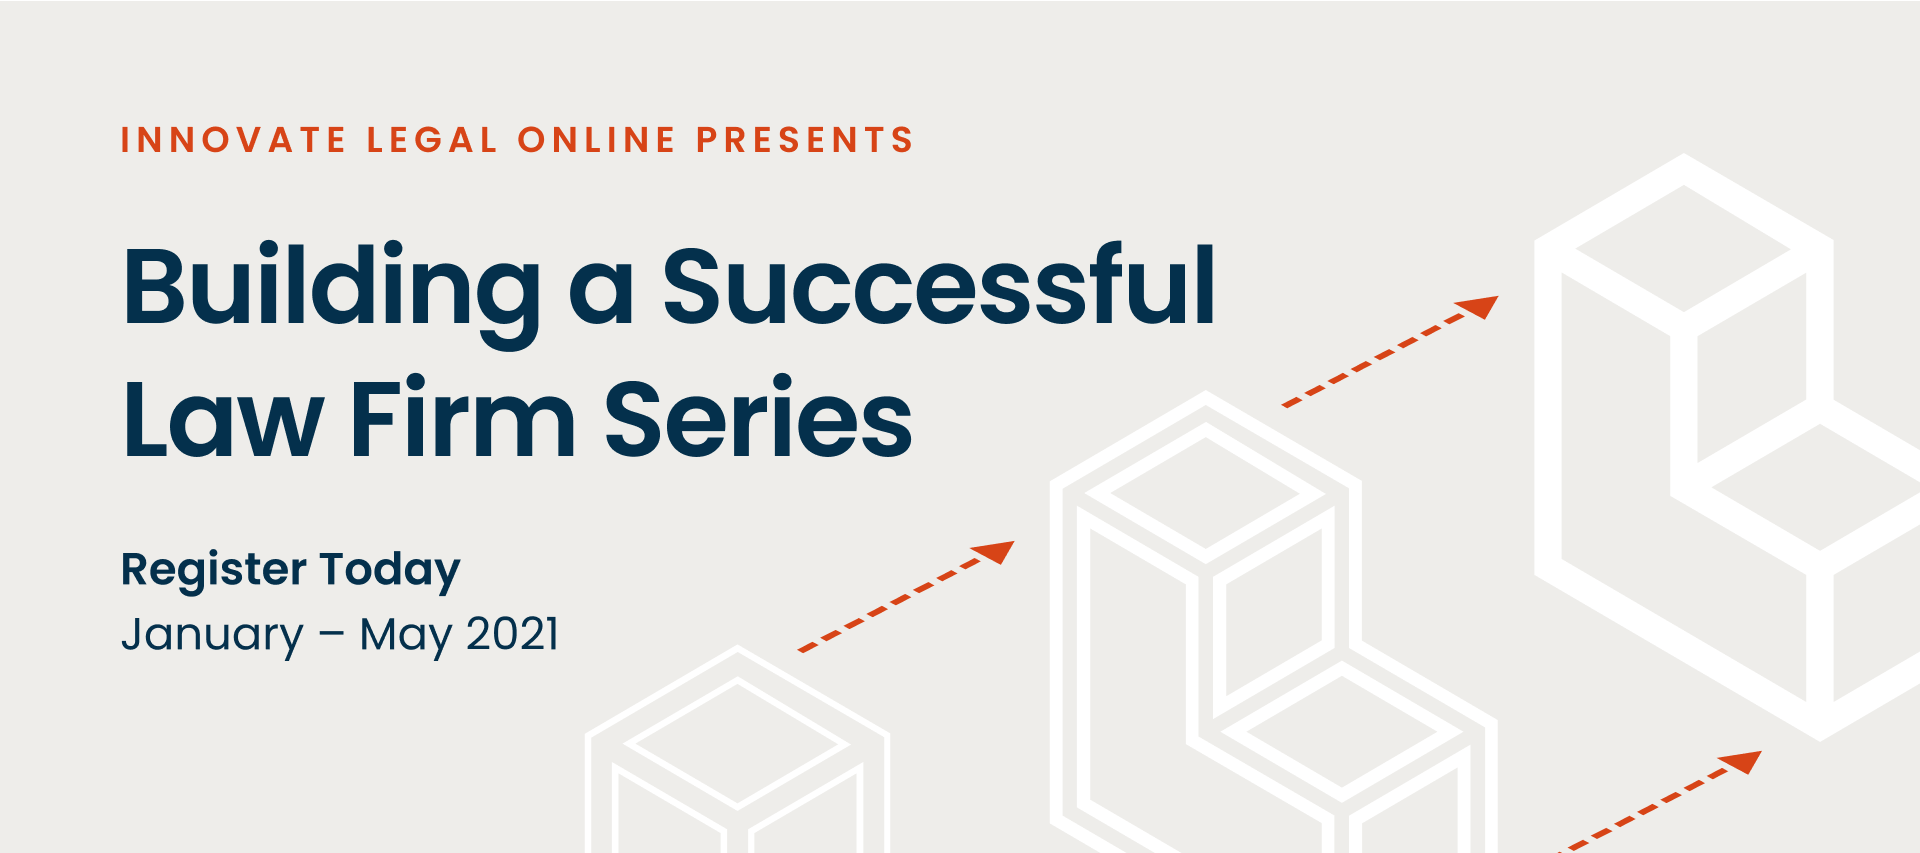 Innovate Legal Online Presents: Building a Successful Law Firm 🏆